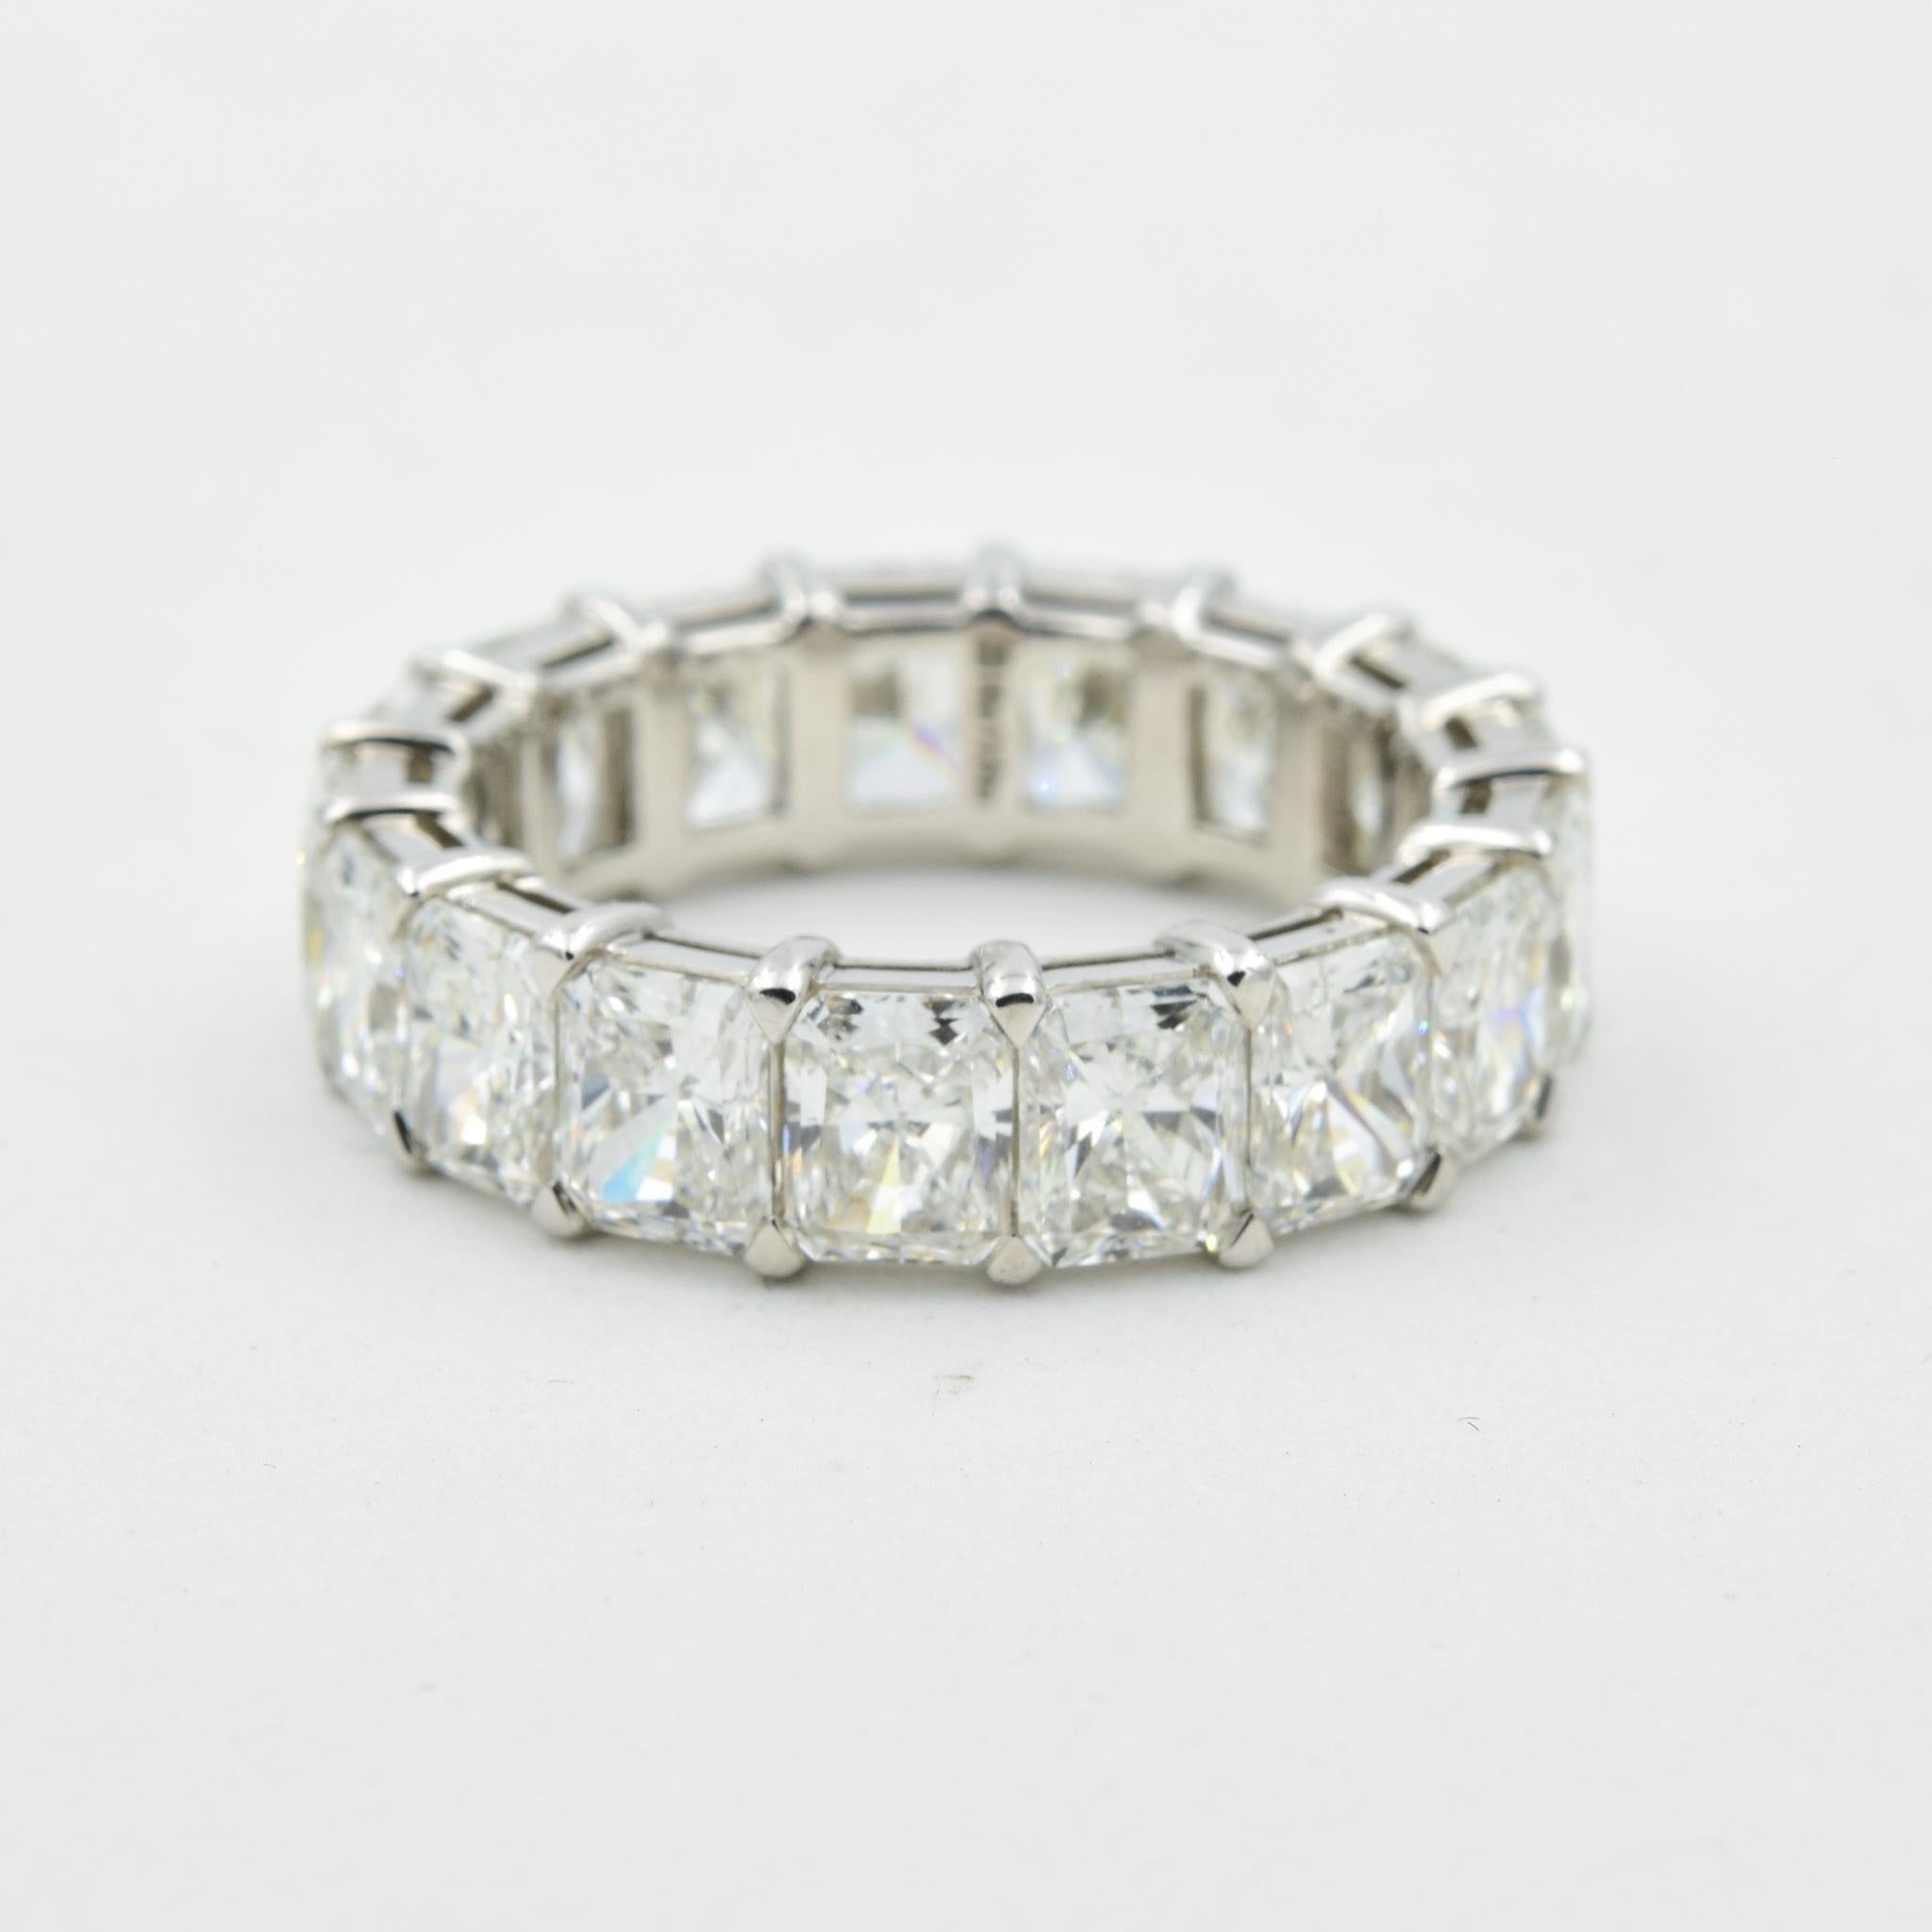 This stunning diamond eternity band in platinum has 7.15 carats of radiant cut diamonds. This ring is made by Norman Silverman, who is known strongly in the jewelry world to represent craftsmanship and quality.  This ring has 17 diamonds each with